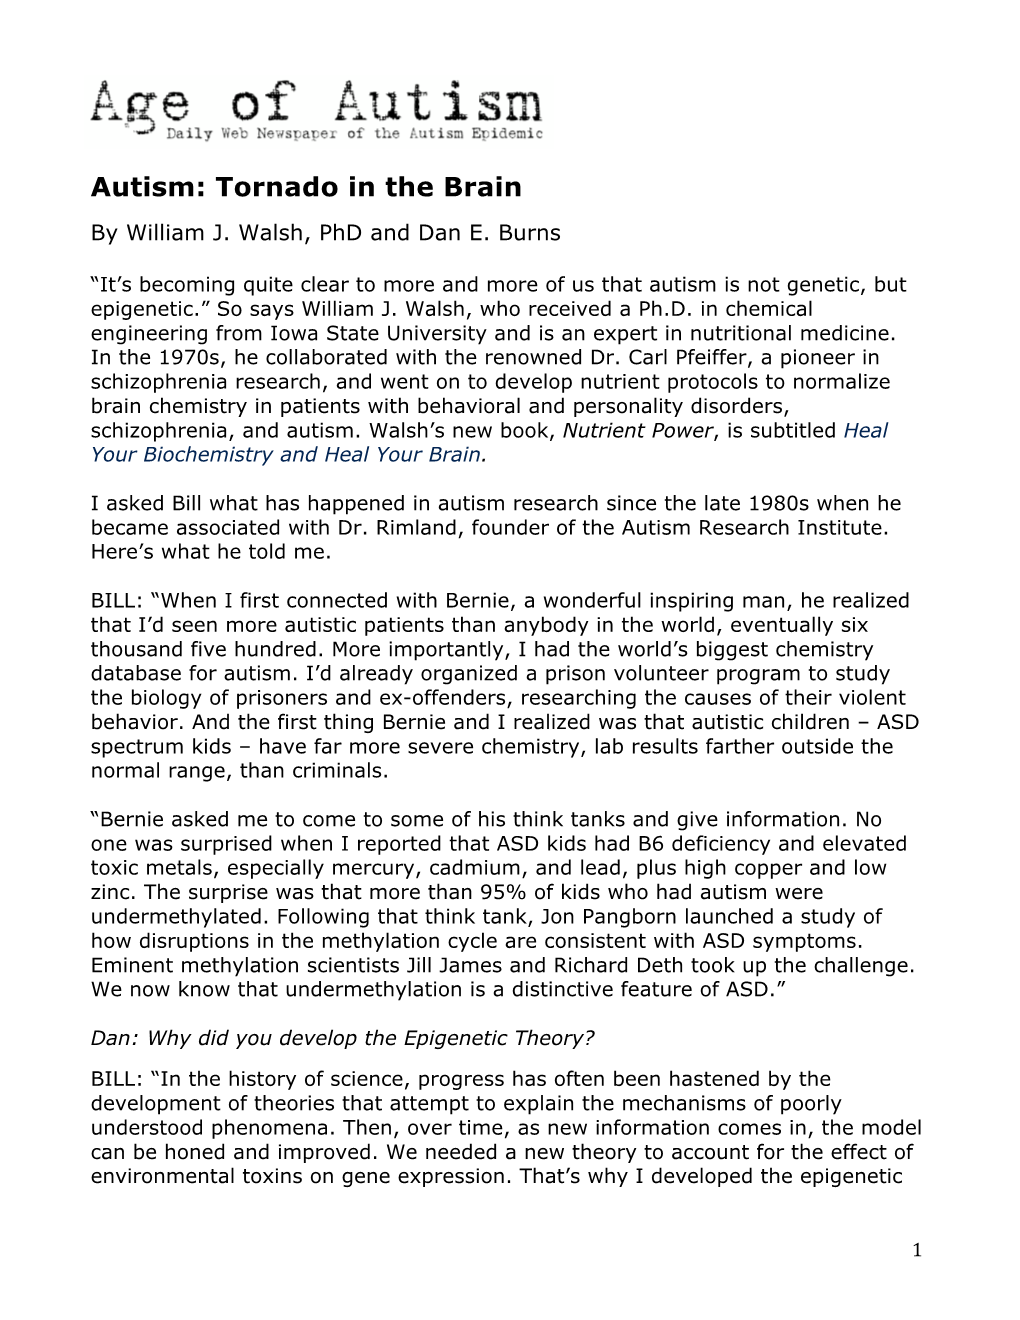 Autism: Tornado in the Brain by William J